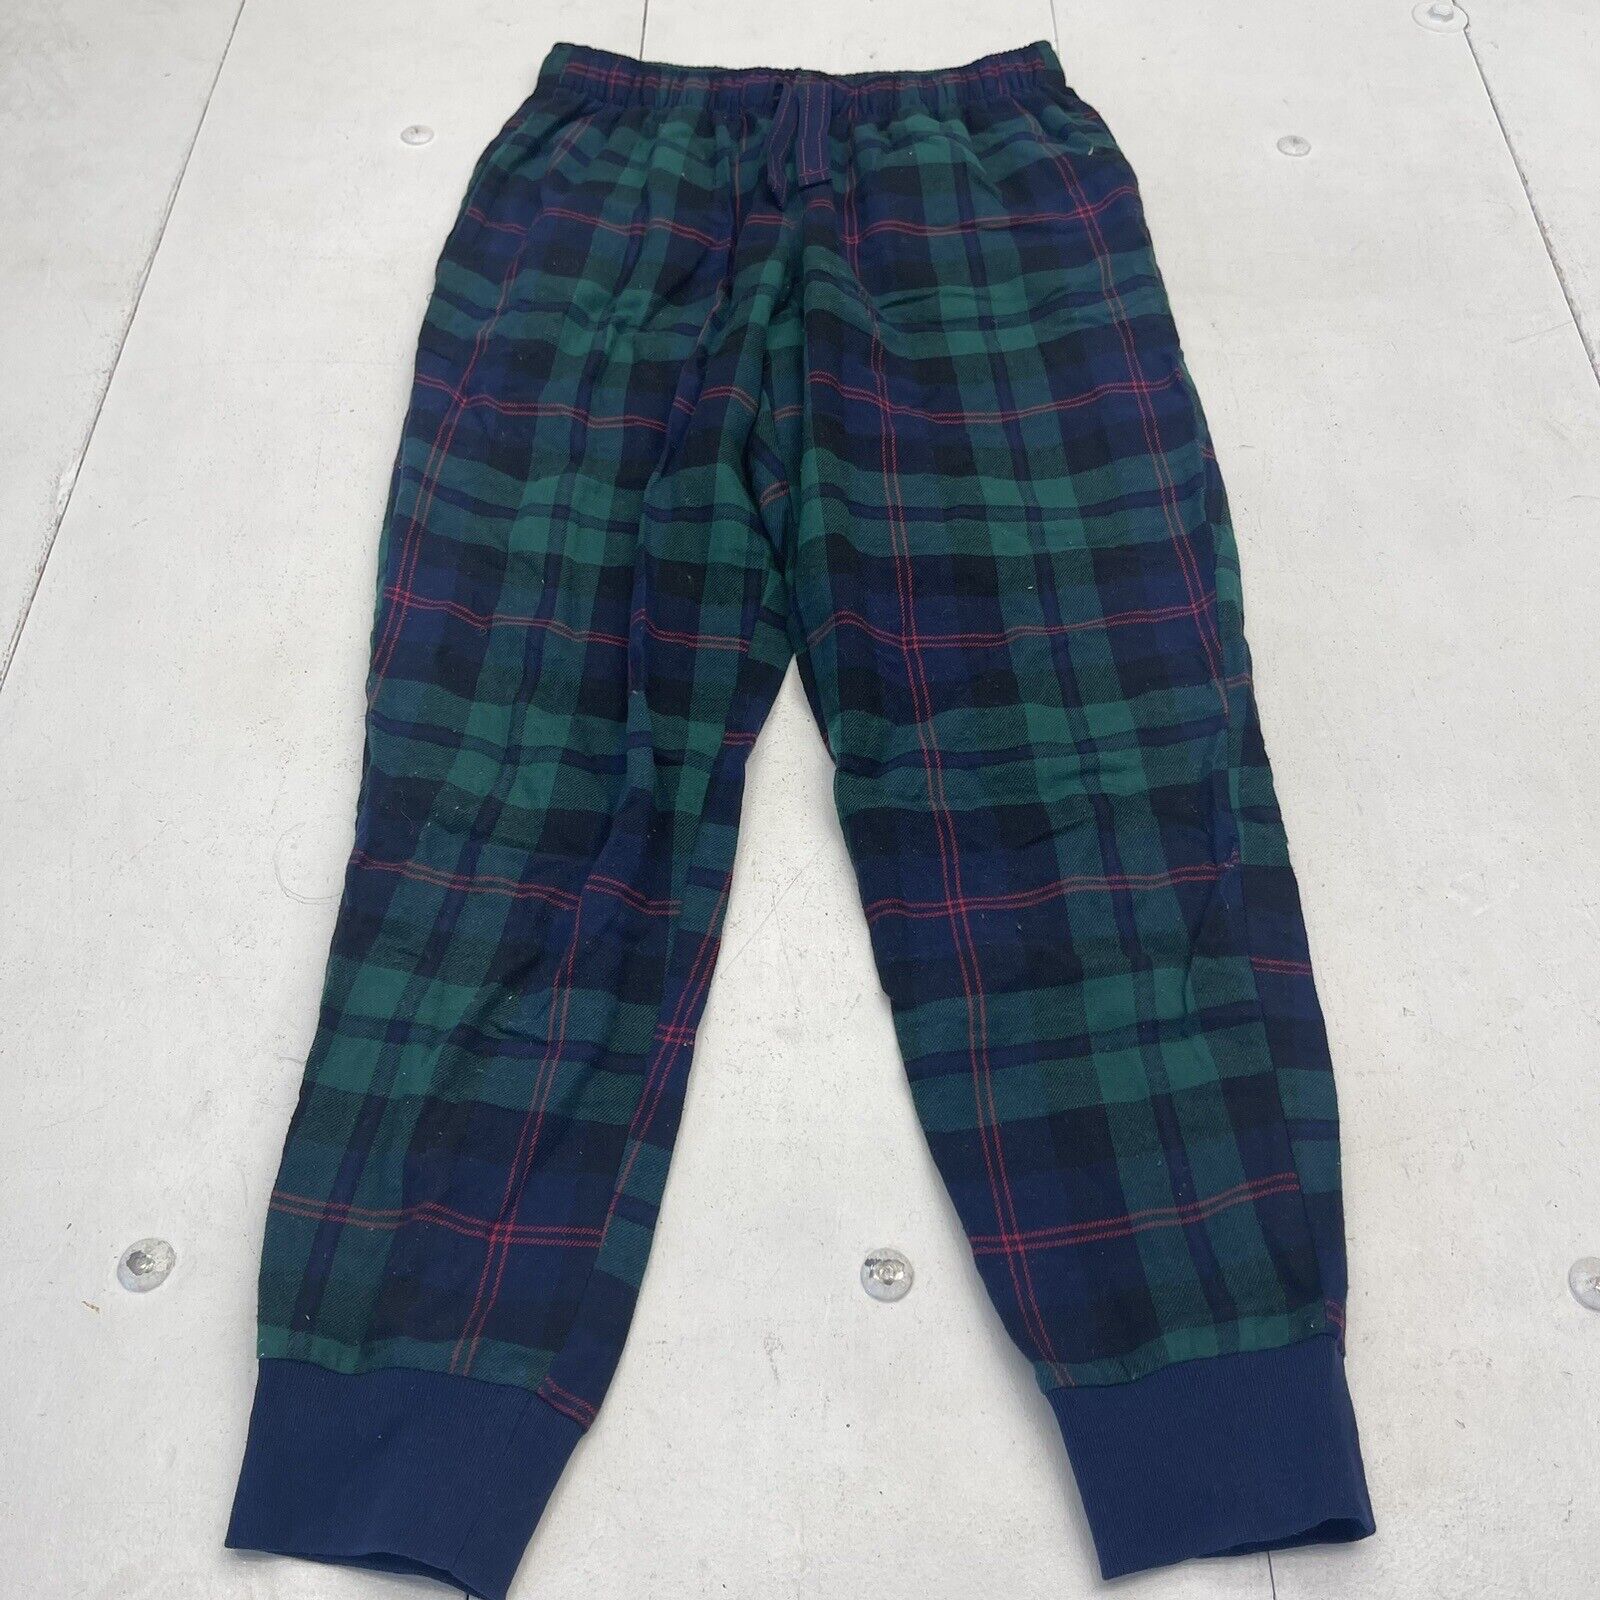 Preowned Men's Old Navy Flannel Pajama Pants, Red/Green Tartan, Size Small